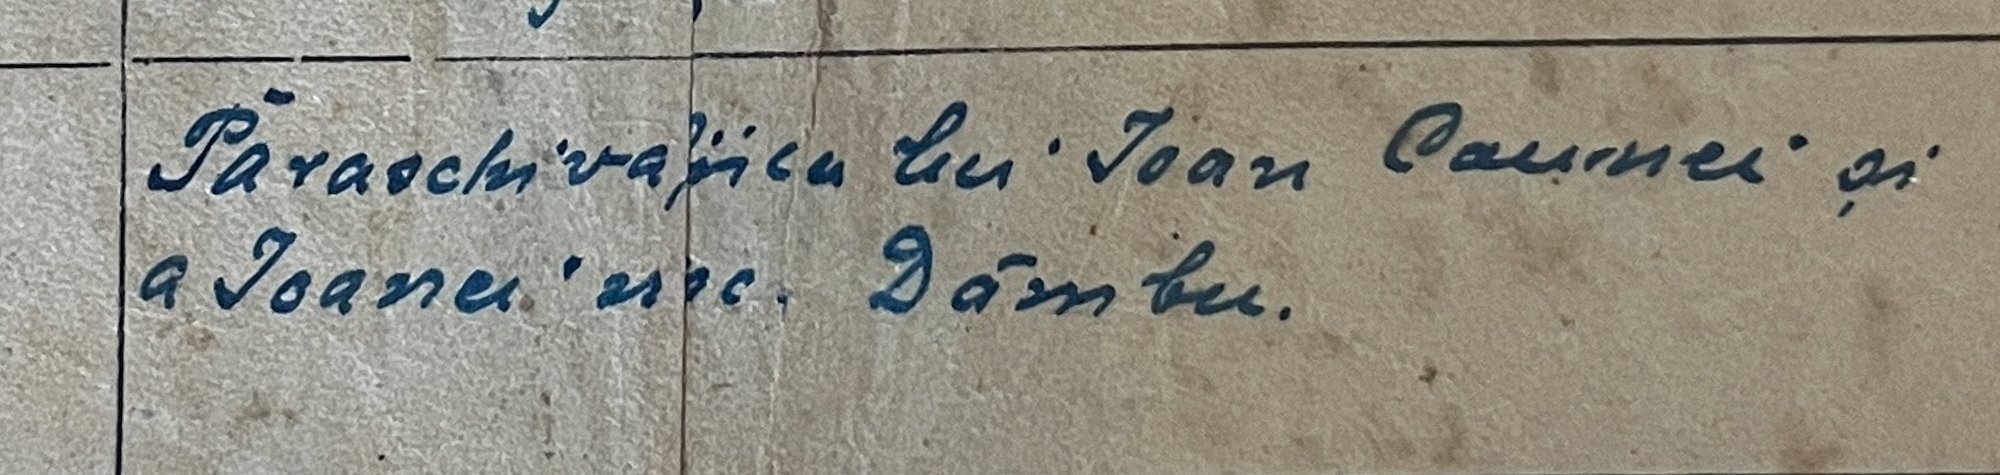  Excerpt from Grandma Maria’s birth certificate, Feb 1921 (family archive).  Under the ‘mother’ section it reads: Paraschiva, daughter of Ioan Caunei and of Ioana, nee Dambu. 